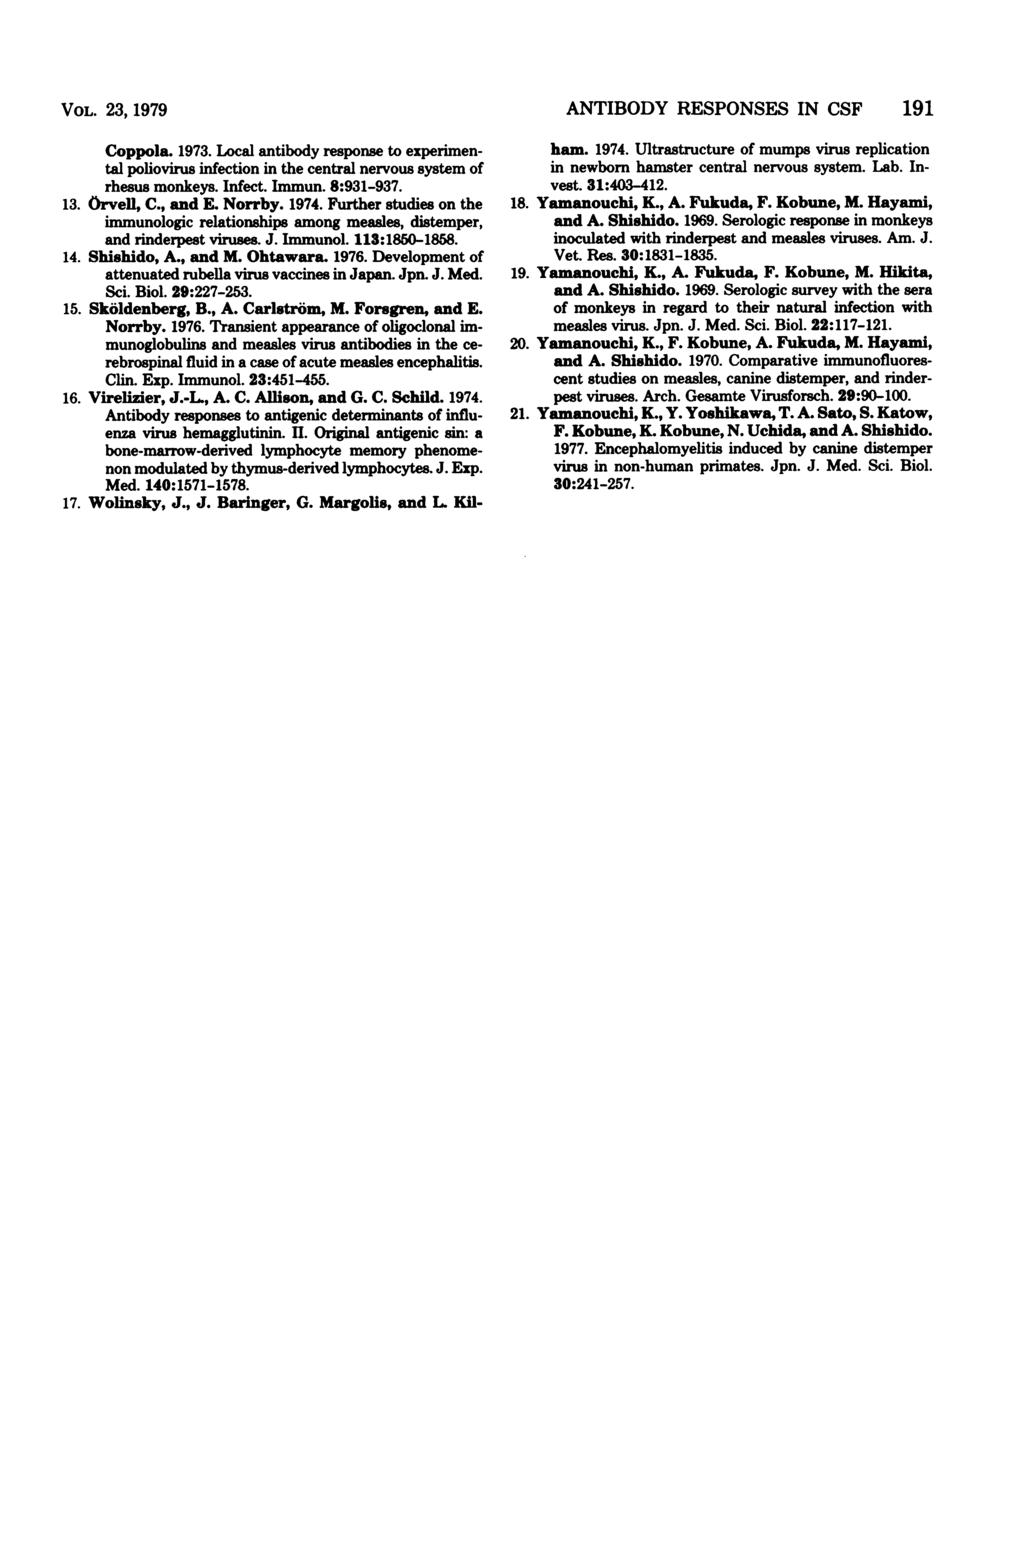 VOL. 23, 1979 ANTIBODY RESPONSES IN CSF 191 Coppola. 1973. Local antibody response to experimental poliovirus infection in the central nervous system of rhesus monkeys. Infect. Immun. 8:931-937. 13.